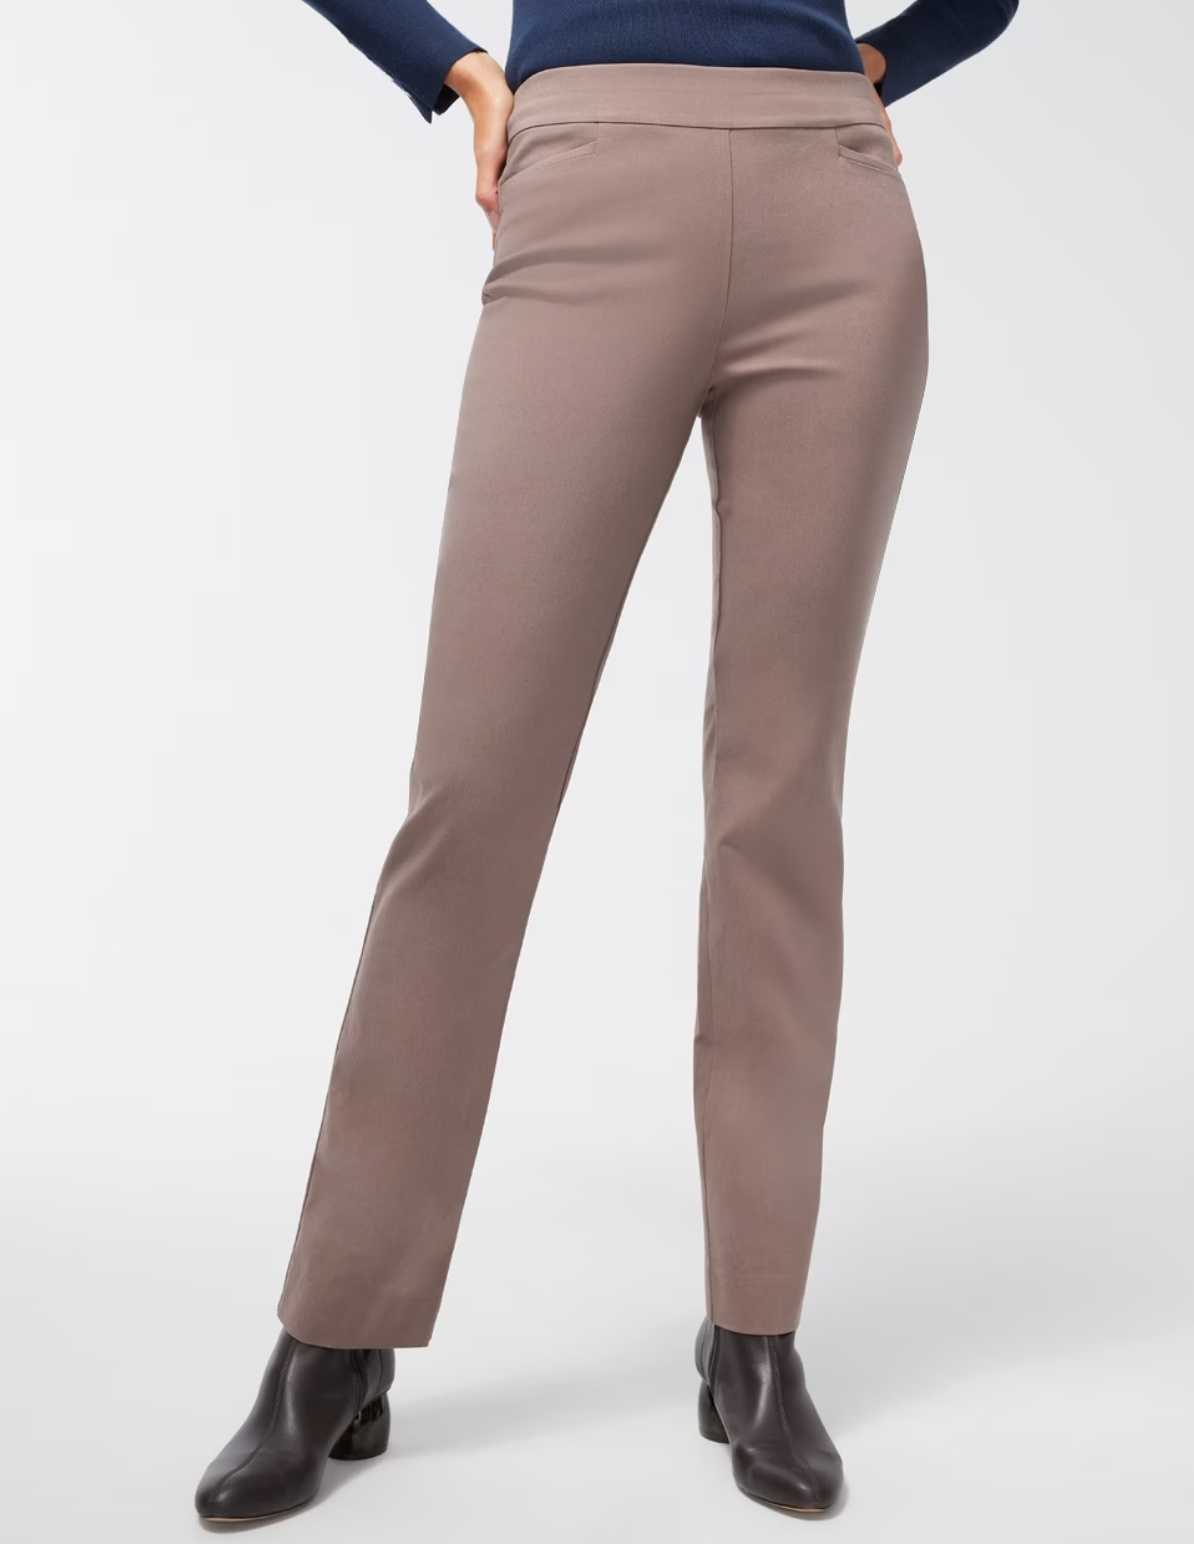 All In Motion Wrinkle Resistant Casual Pants for Women